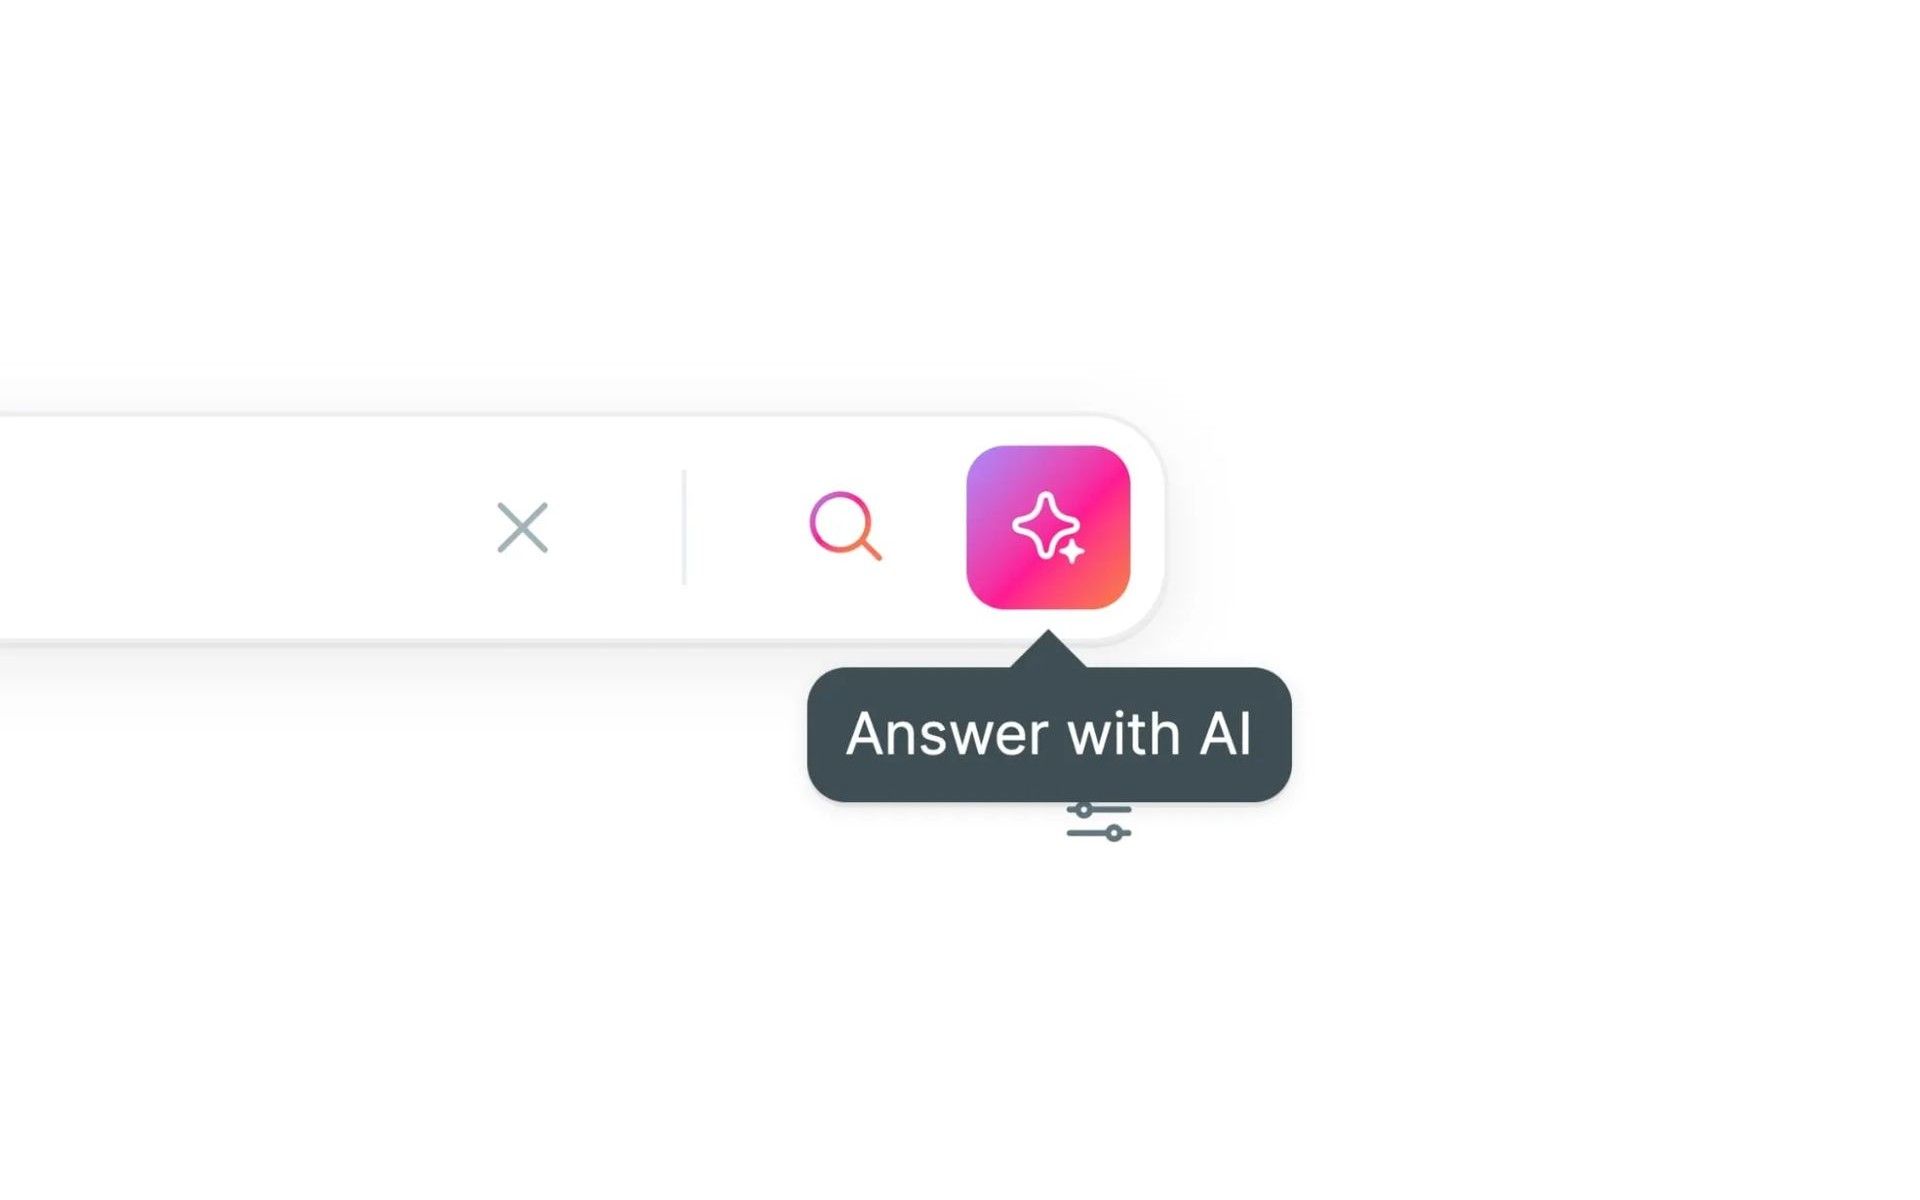 Brave browser integrates privacy-focused “Answer with AI” feature